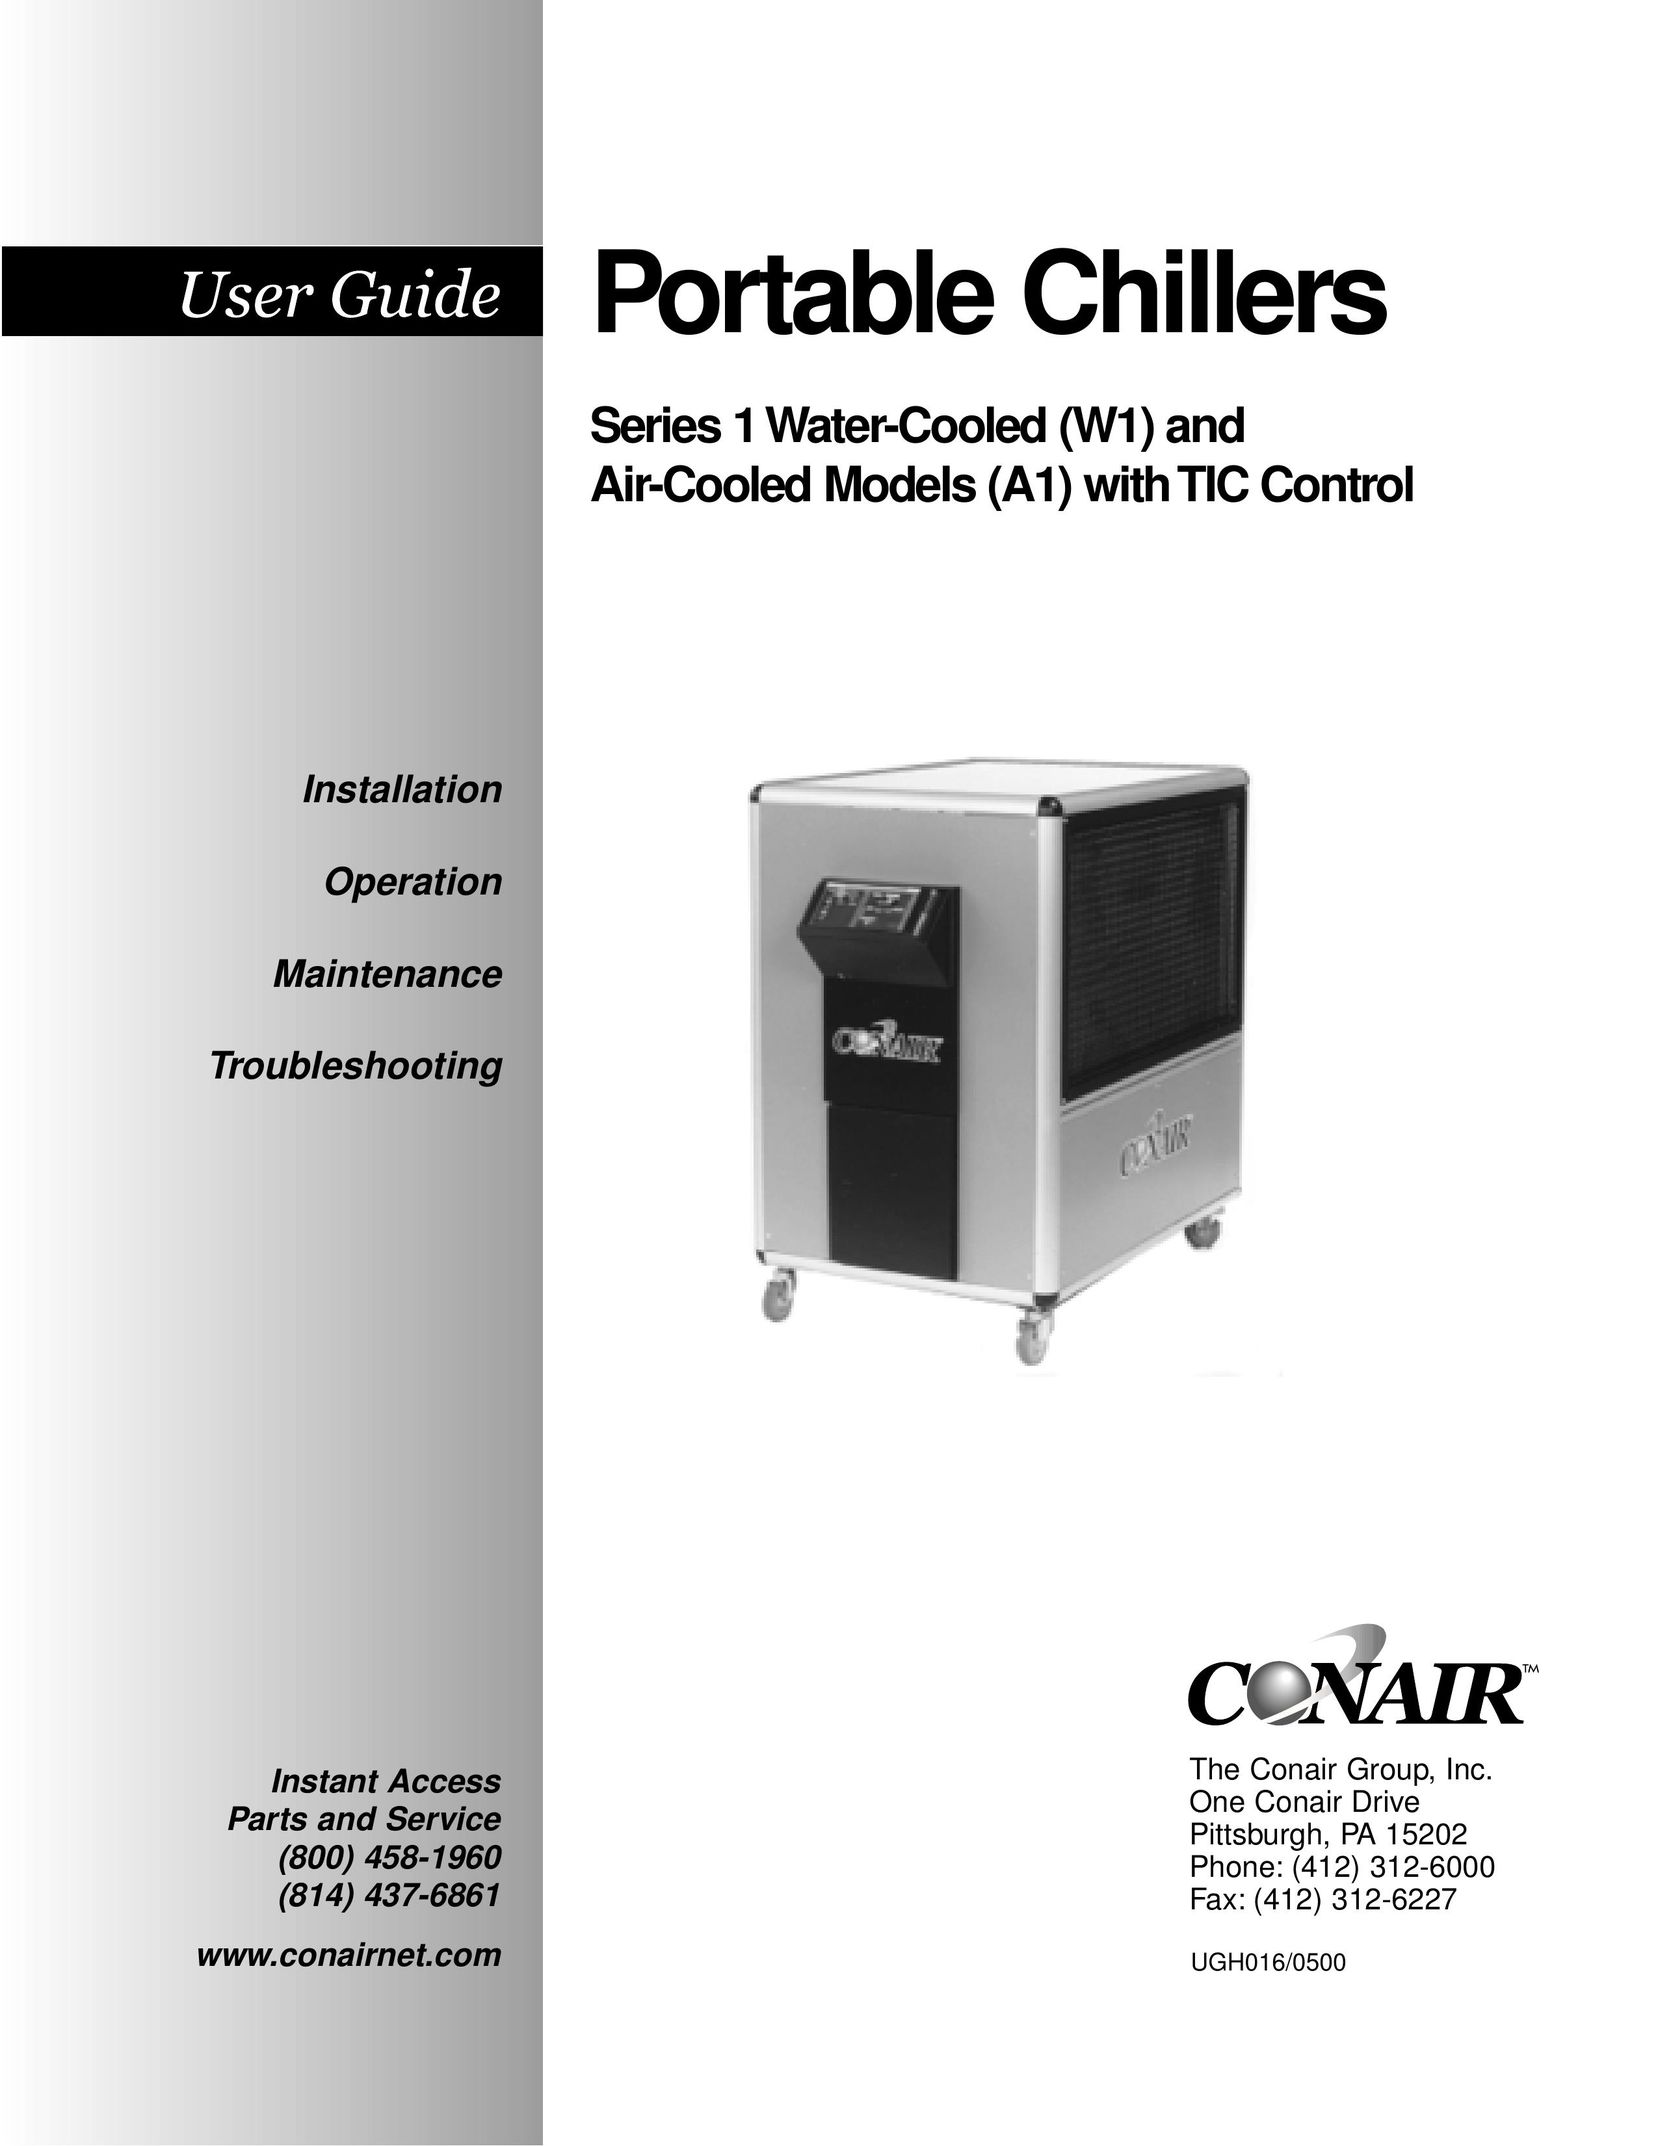 Conair Portable Chillers Series 1Water-Cooled (W1) and Air-Cooled Models (A1) withTIC Control Air Conditioner User Manual